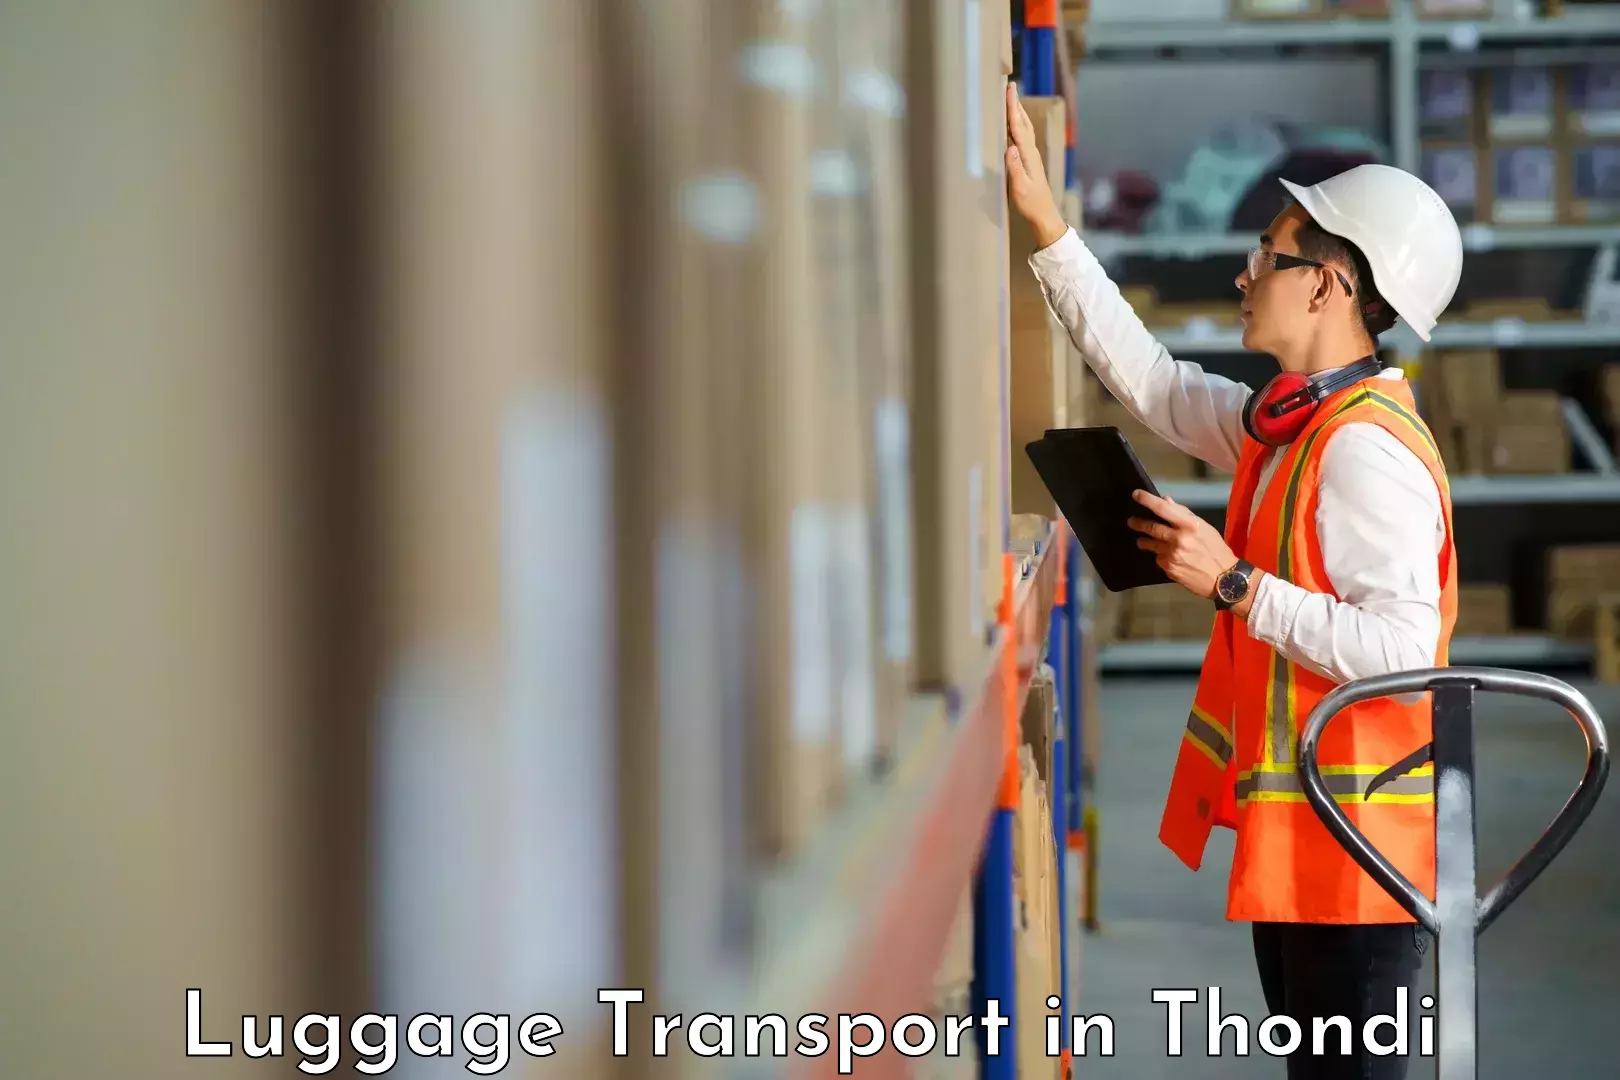 Luggage transport consulting in Thondi